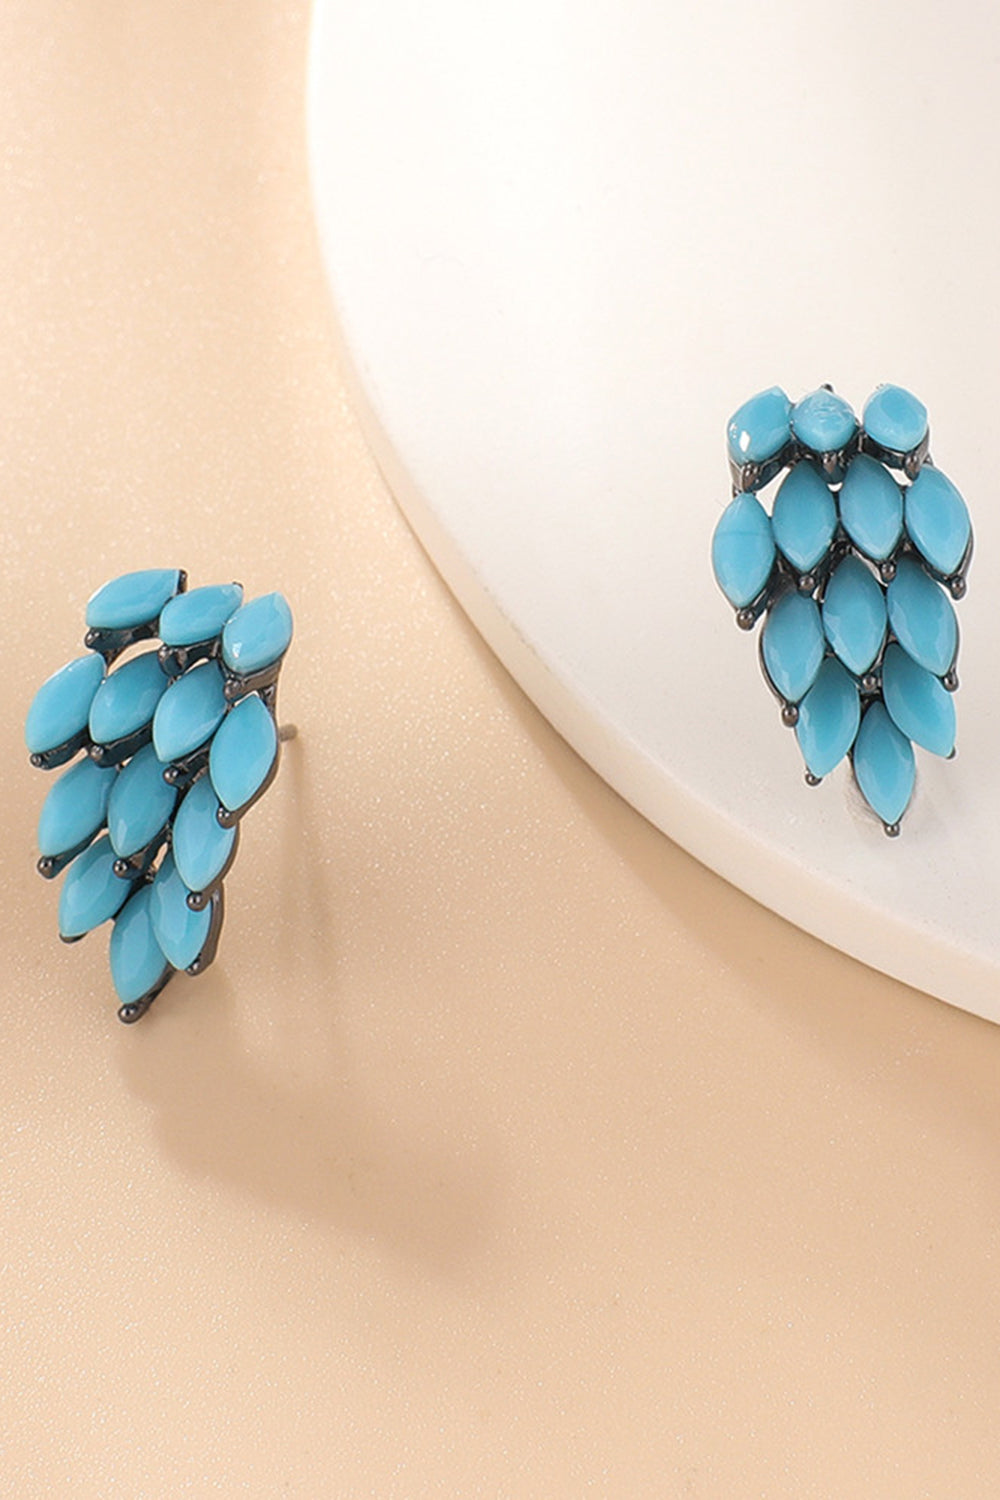 Wheat Turquoise Stud Earrings Sentient Beauty Fashions jewelry